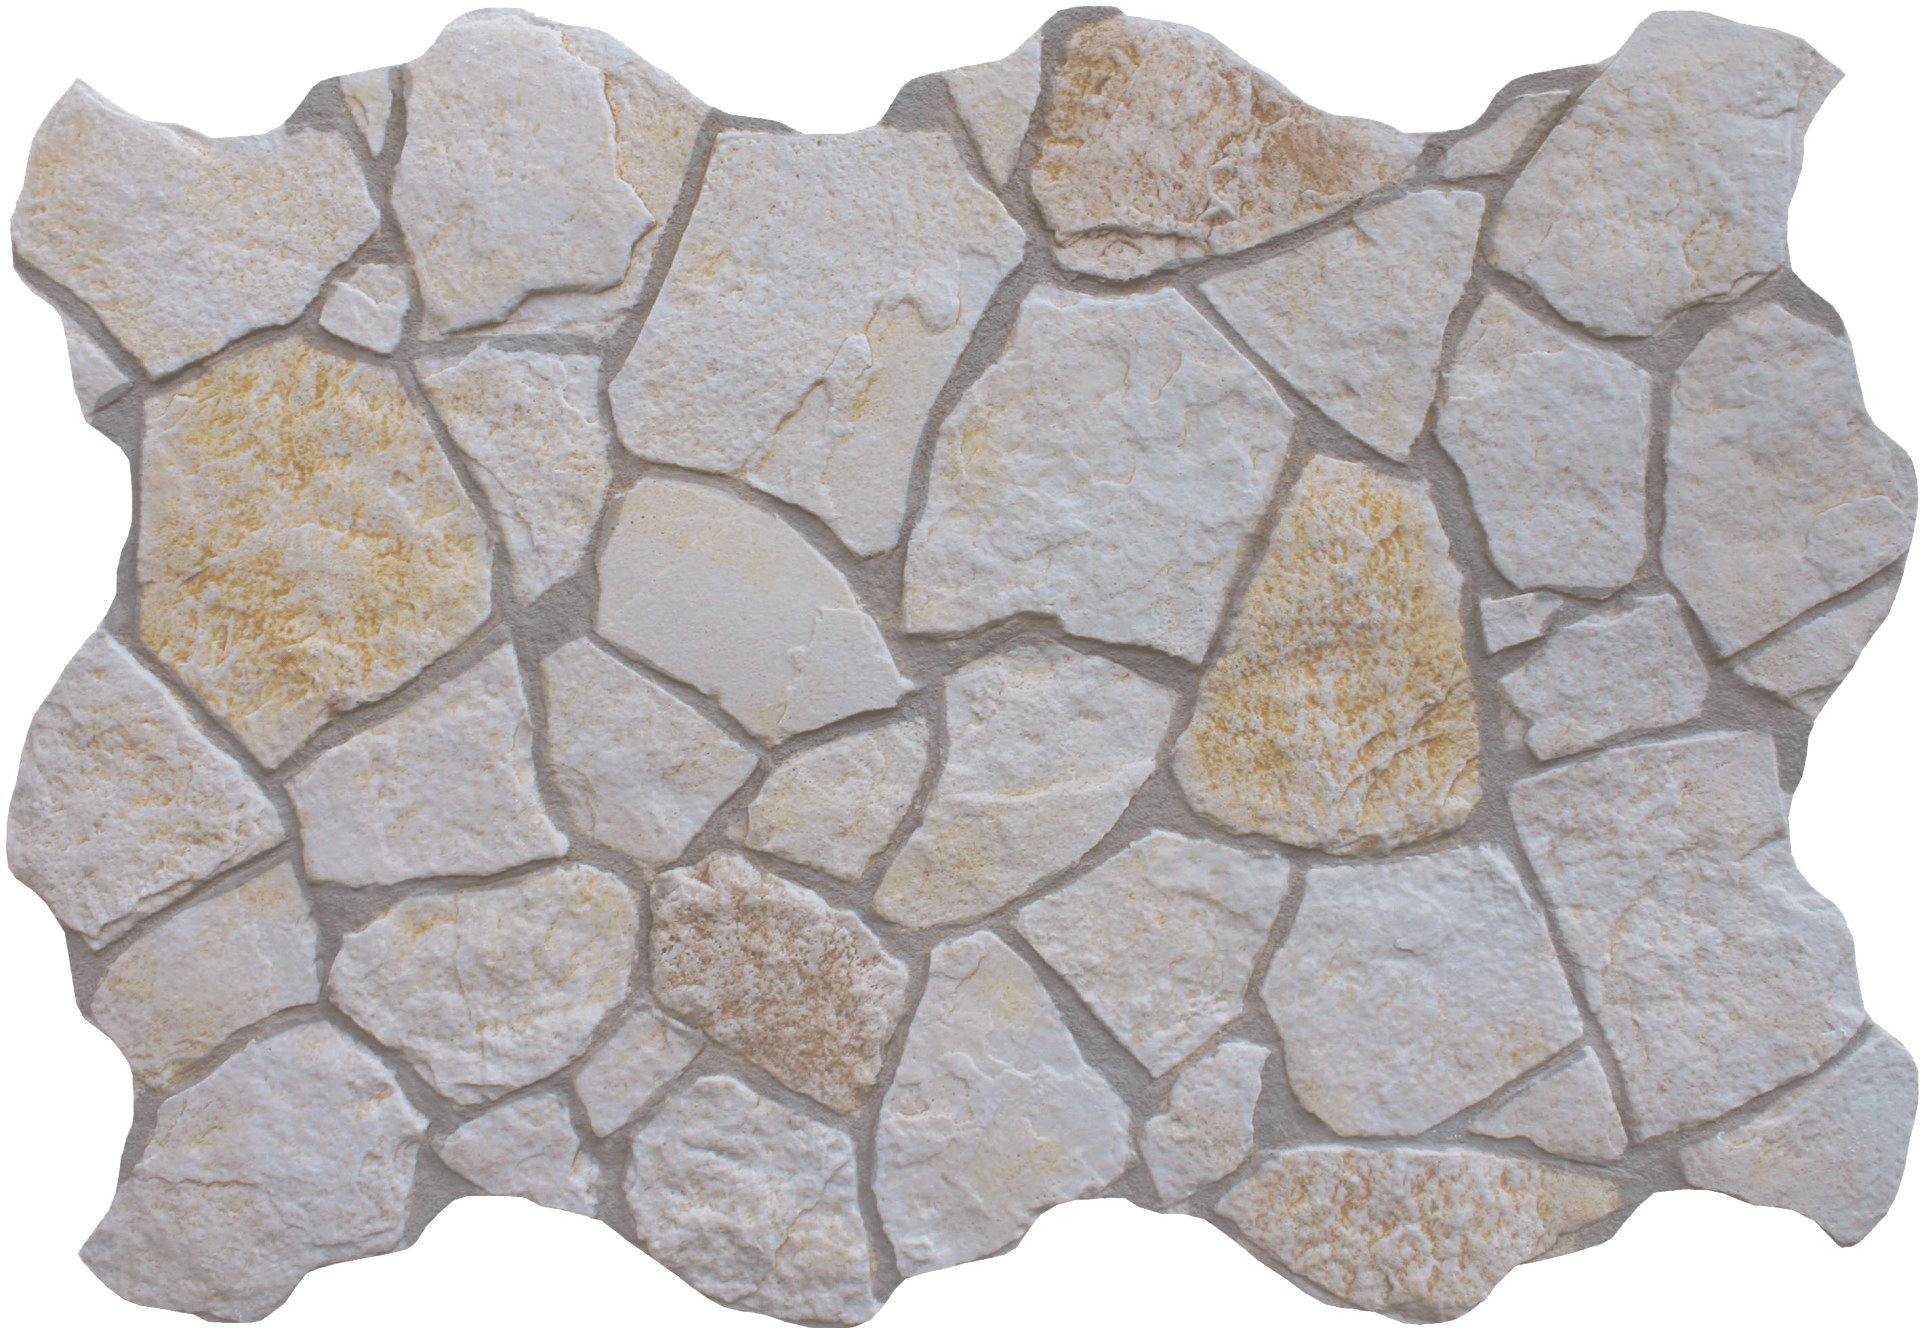 NEWSTONE - Reconstructed Stone Manufacturer In Italy, High Quality Reconstructed Stone Wall Panels Italy, Natural Stone Panels Italy NEWSTONE - Produttore Pietra Ricostruita | Qualità, Estetica Garantita. Pietra Ricostruita | Rivestimenti in Pietra Naturale